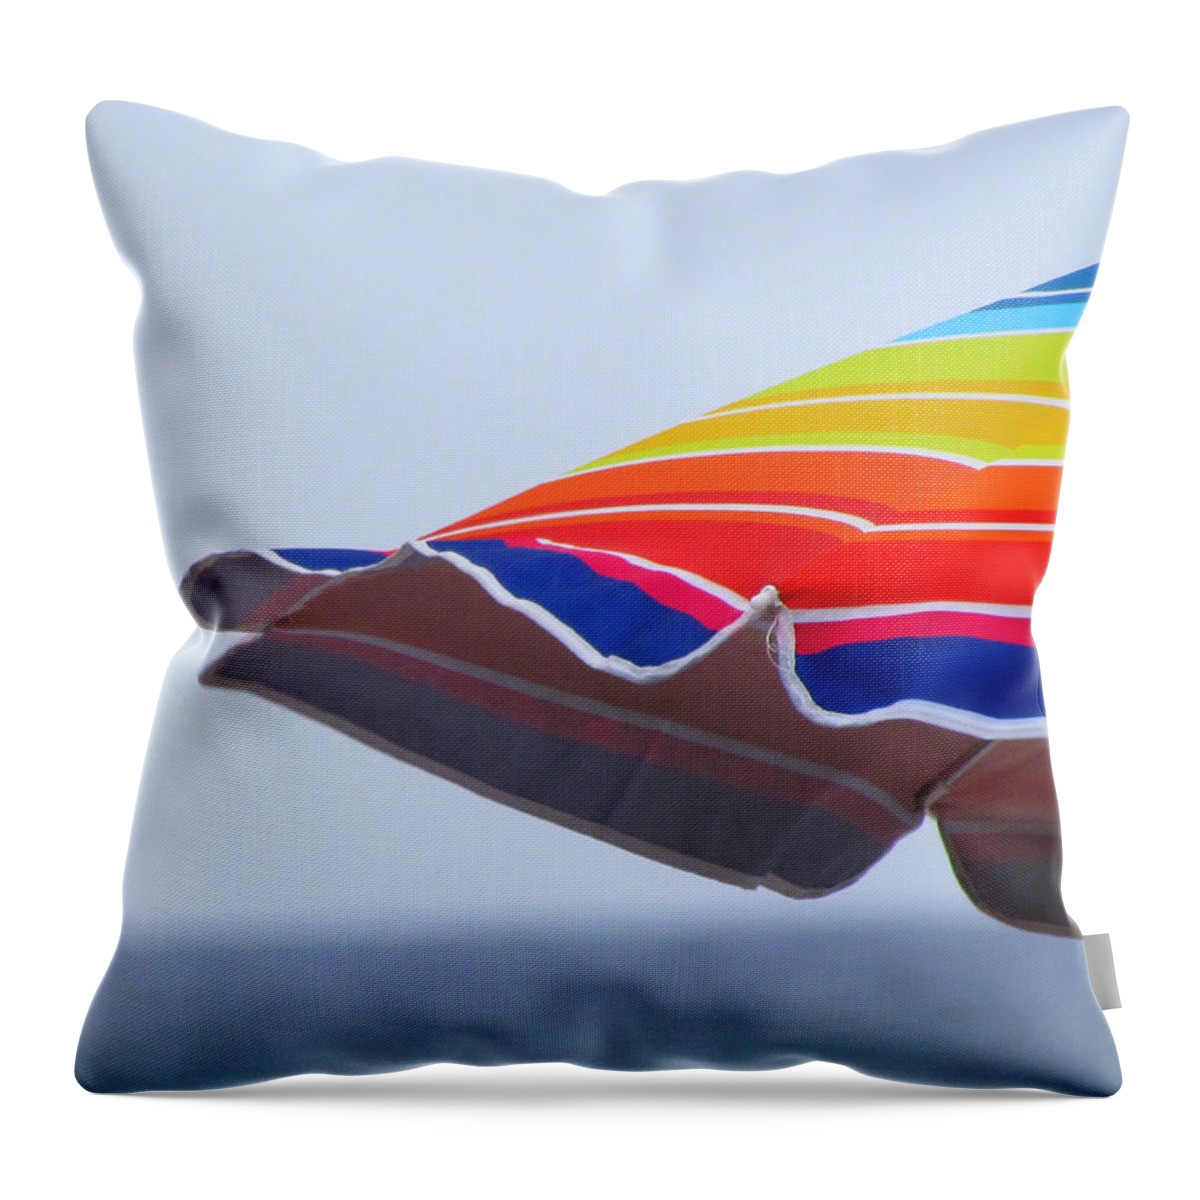 Stripes Throw Pillow featuring the photograph Seaside Stripes by Lori Lafargue